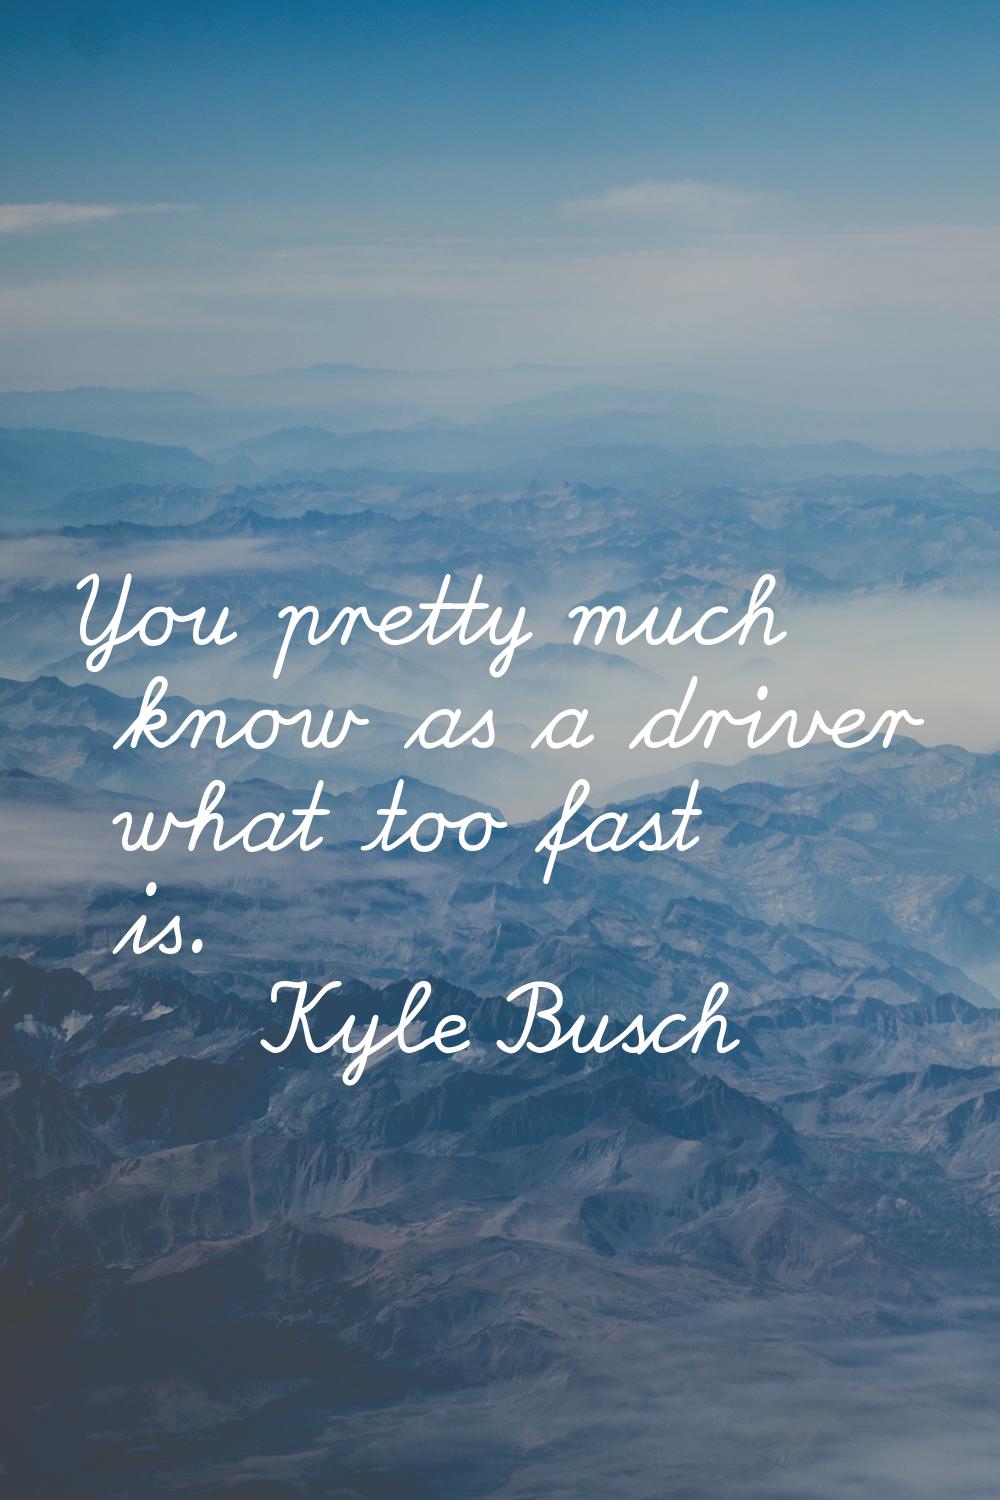 You pretty much know as a driver what too fast is.